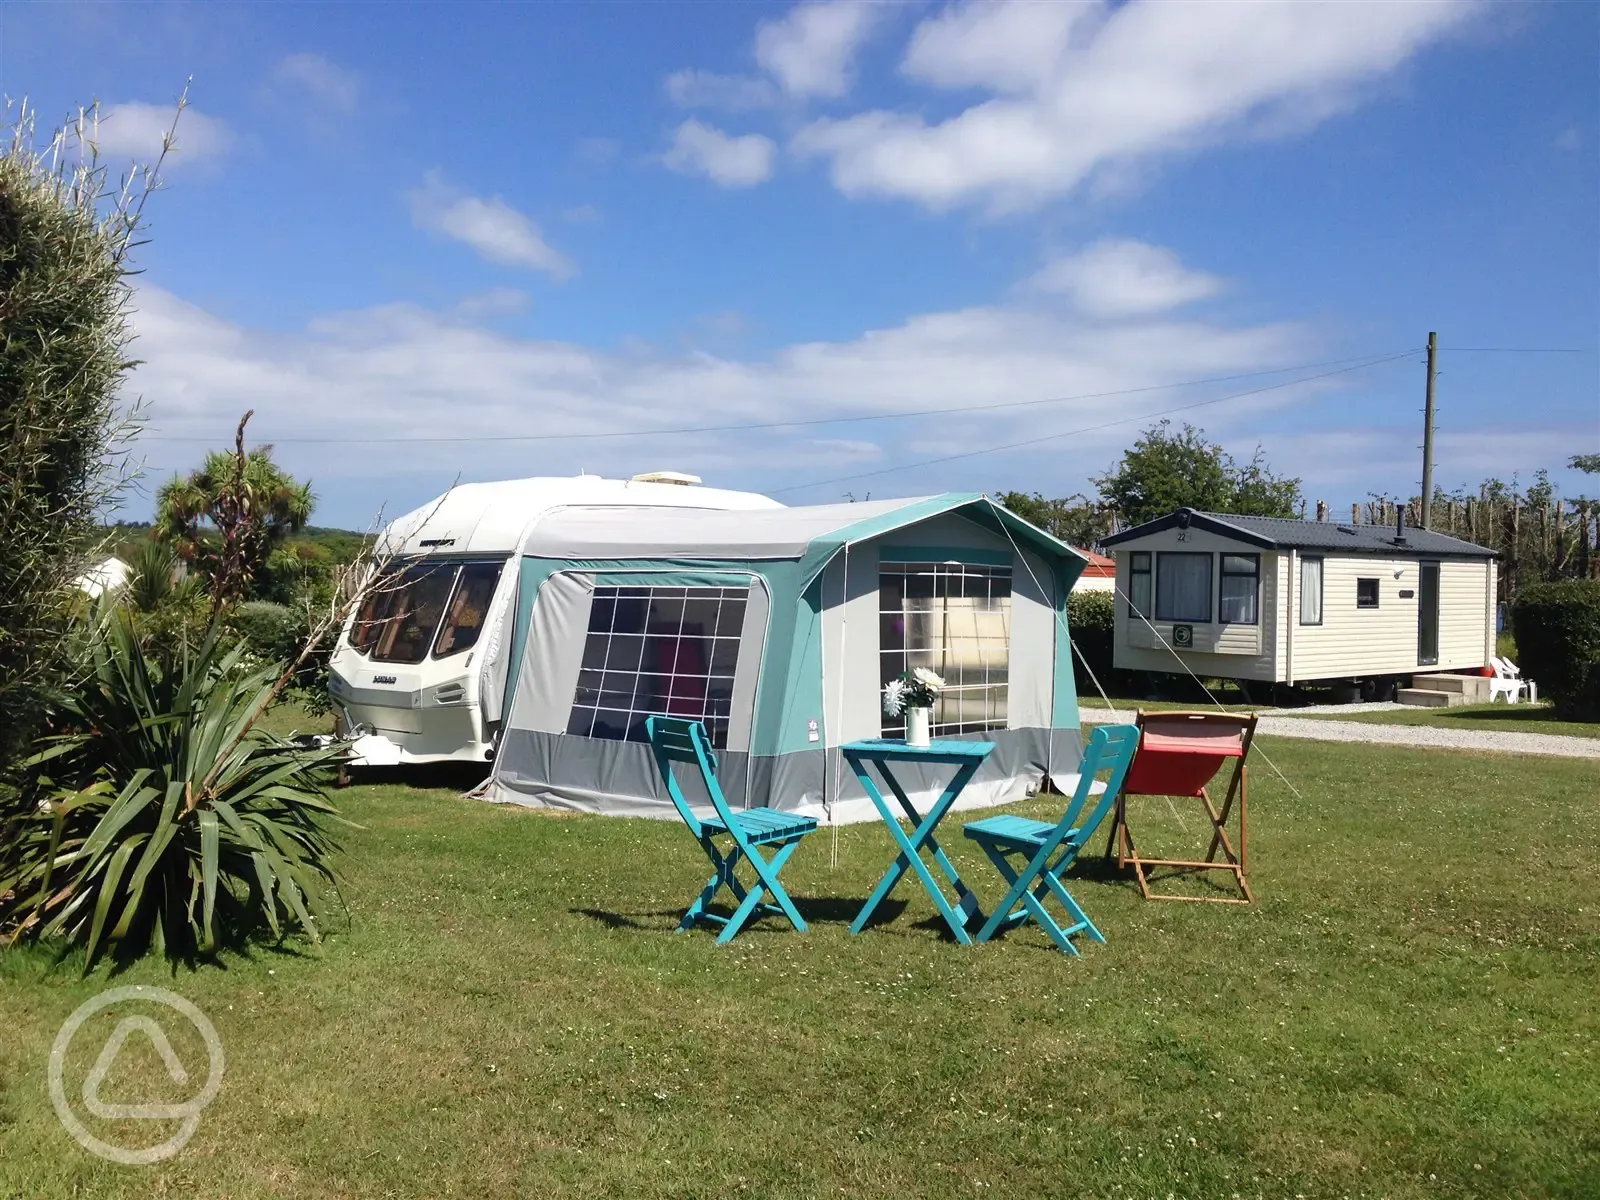 Serviced grass touring pitches